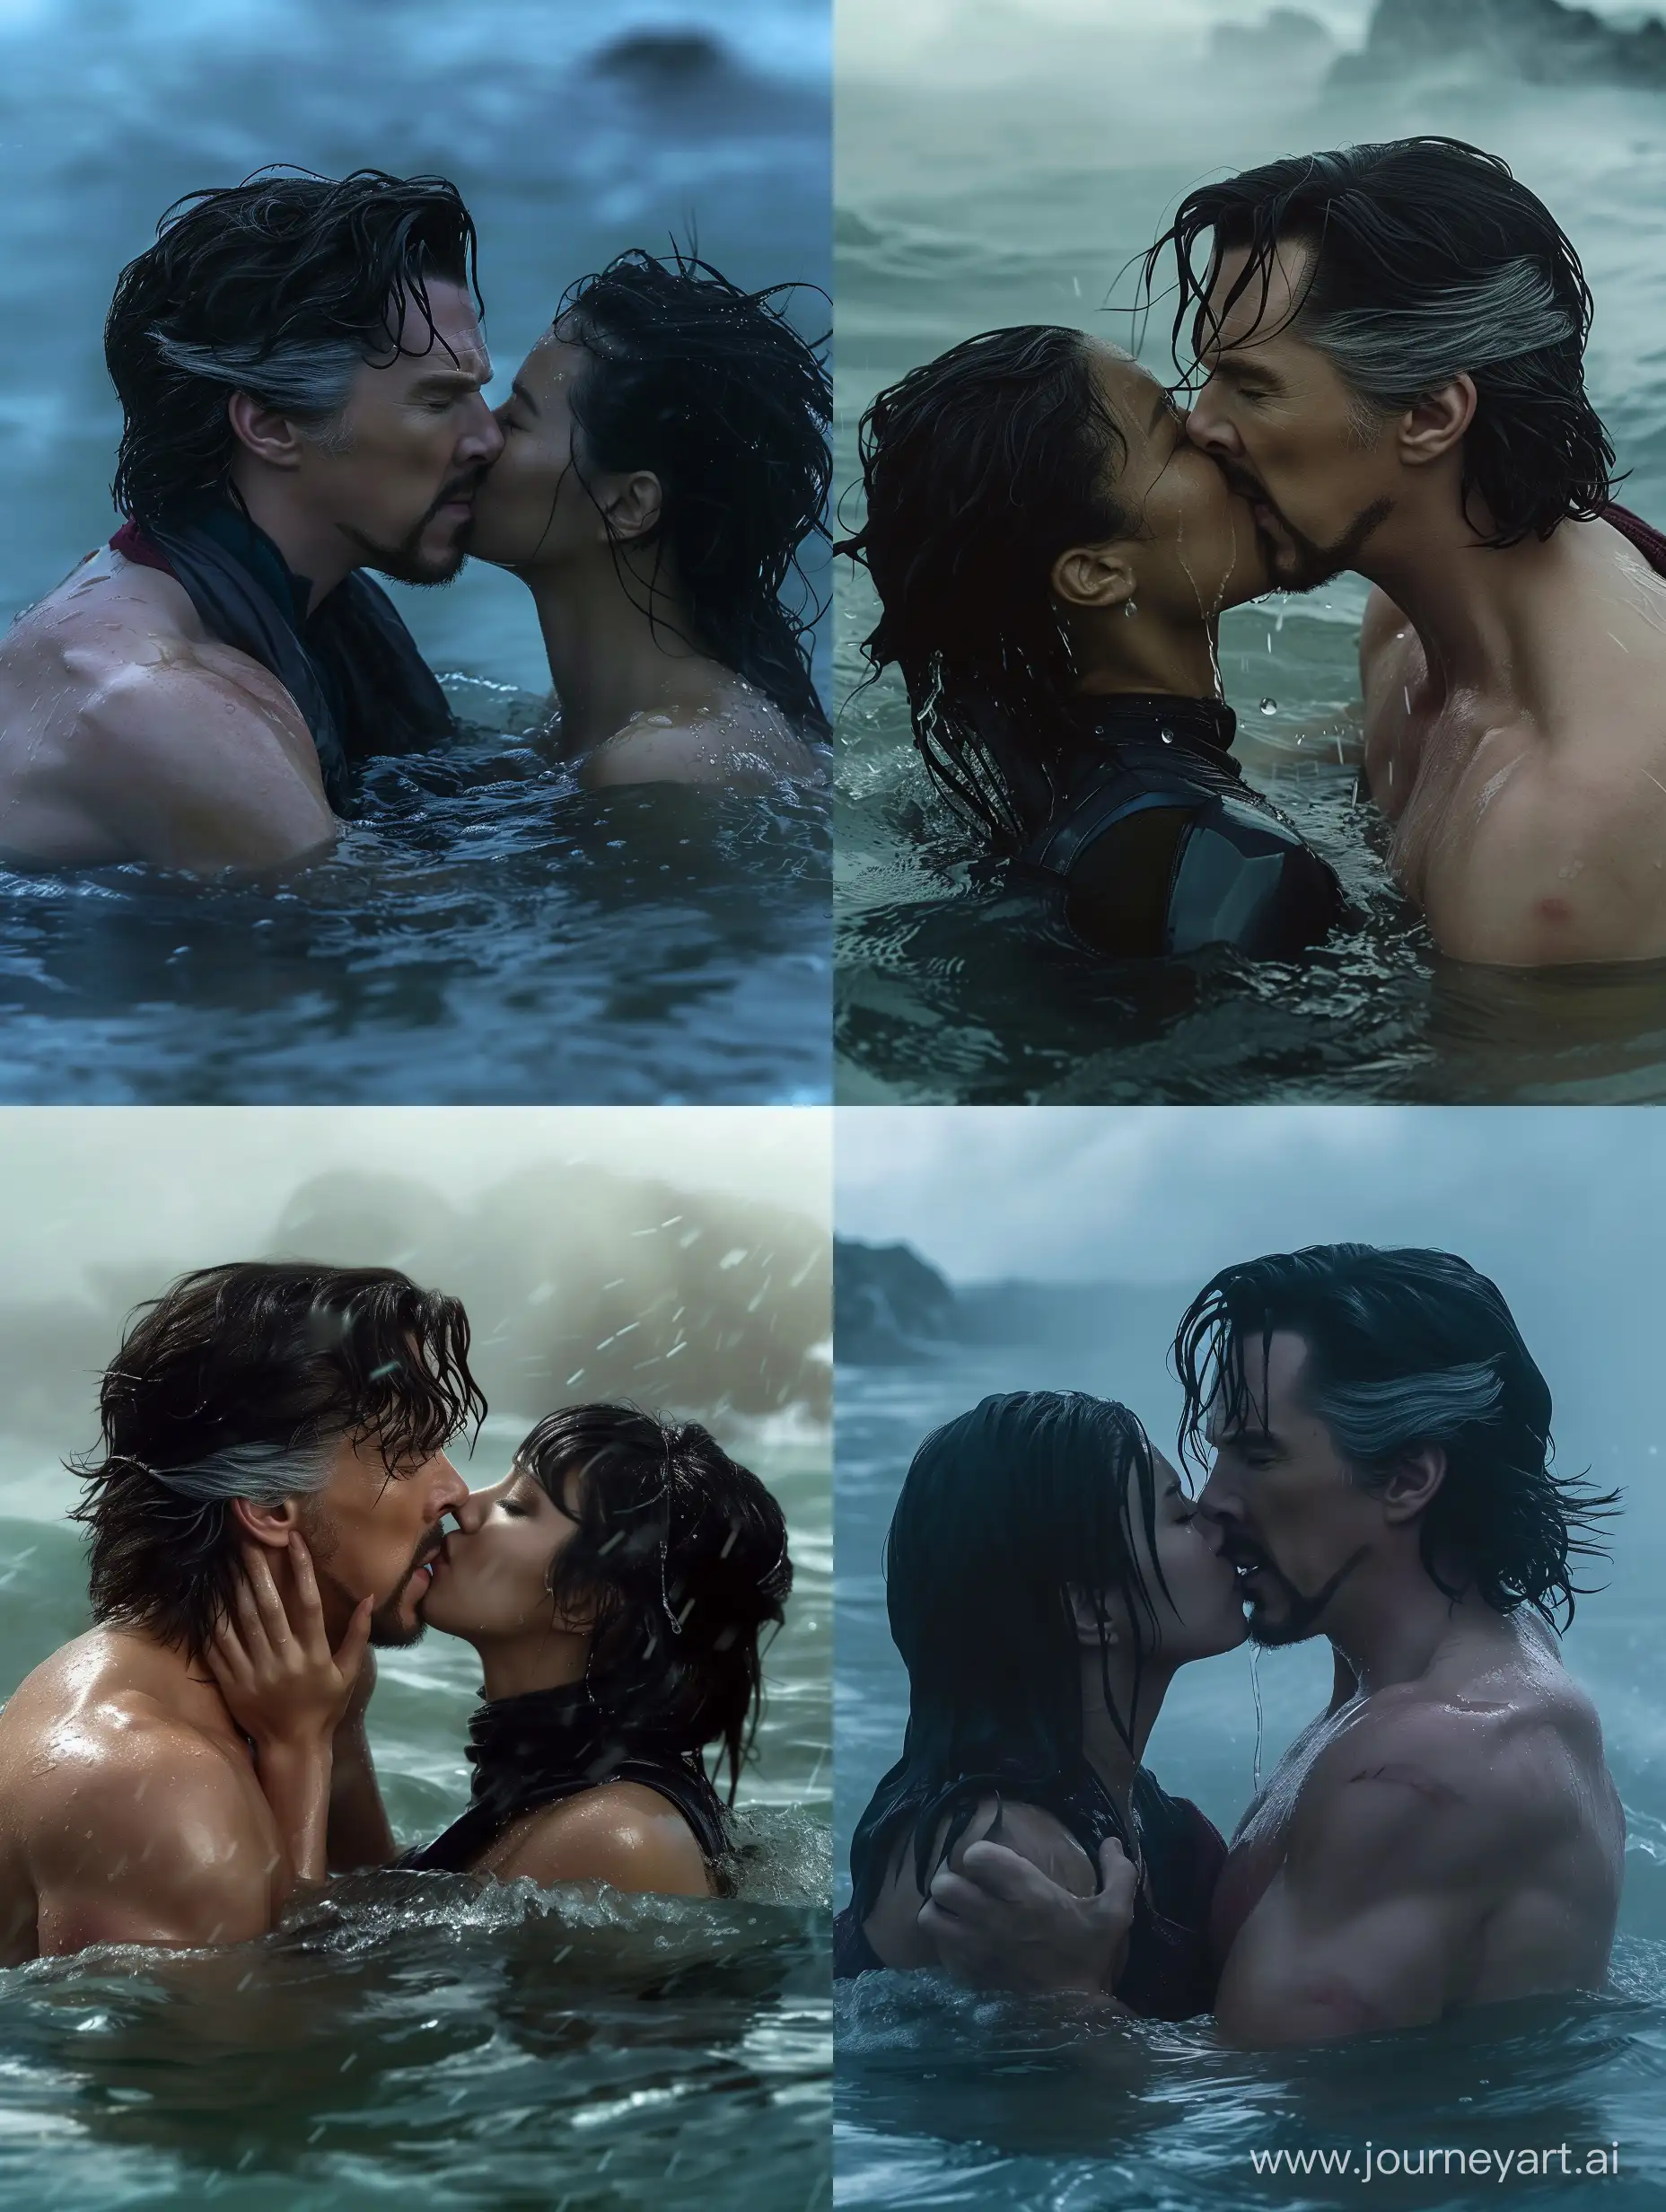 Passionate-Ocean-Kiss-Shirtless-Doctor-Strange-Embracing-BlackHaired-Woman